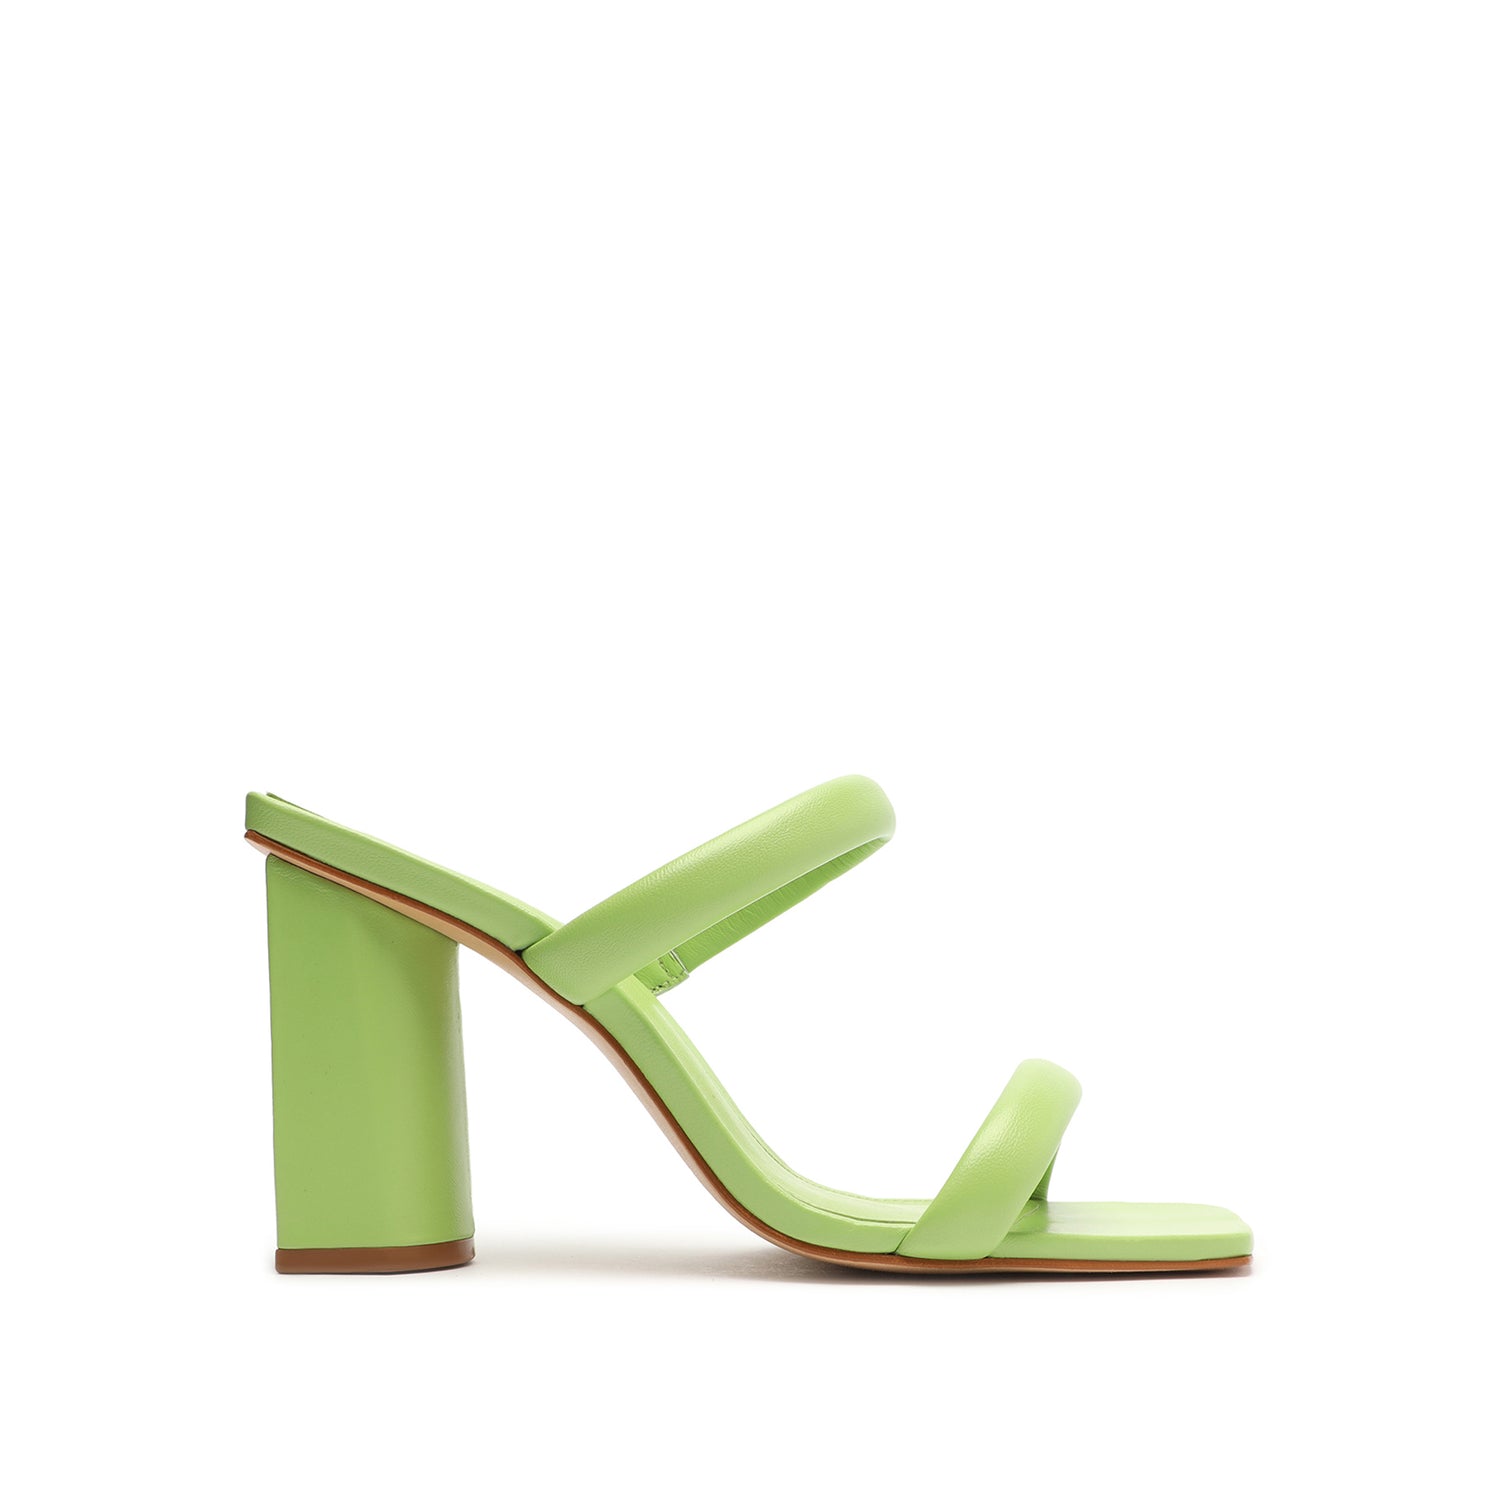 Ully Nappa Leather Sandal Sandals Sale 5 Lime Green Nappa Leather - Schutz Shoes